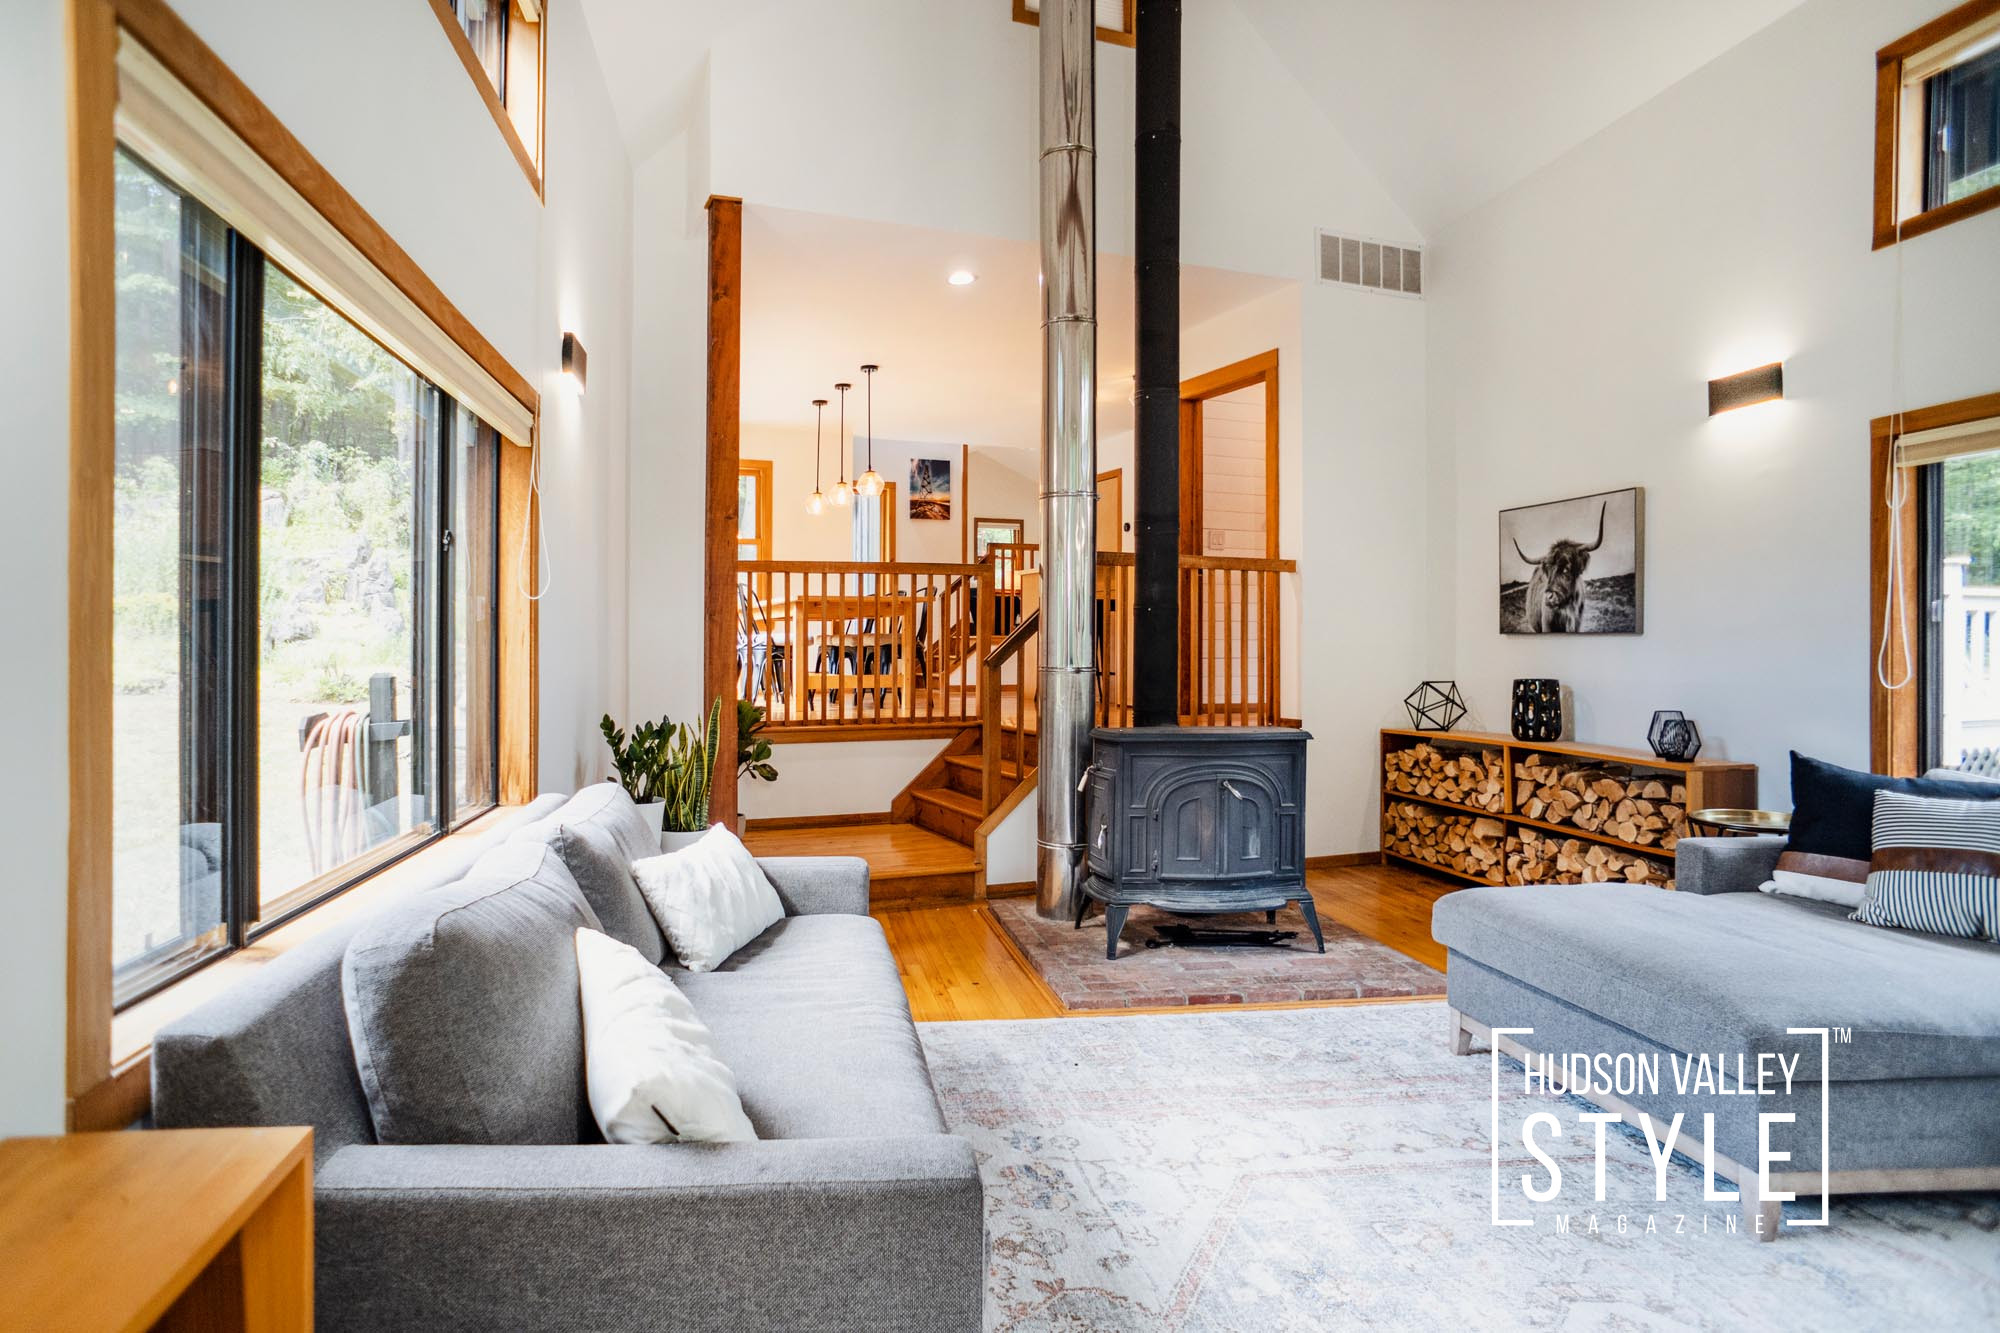 Upstate Vacation: A Modern Rustic Home in Warwick, NY – Airbnb Review by Maxwell Alexander